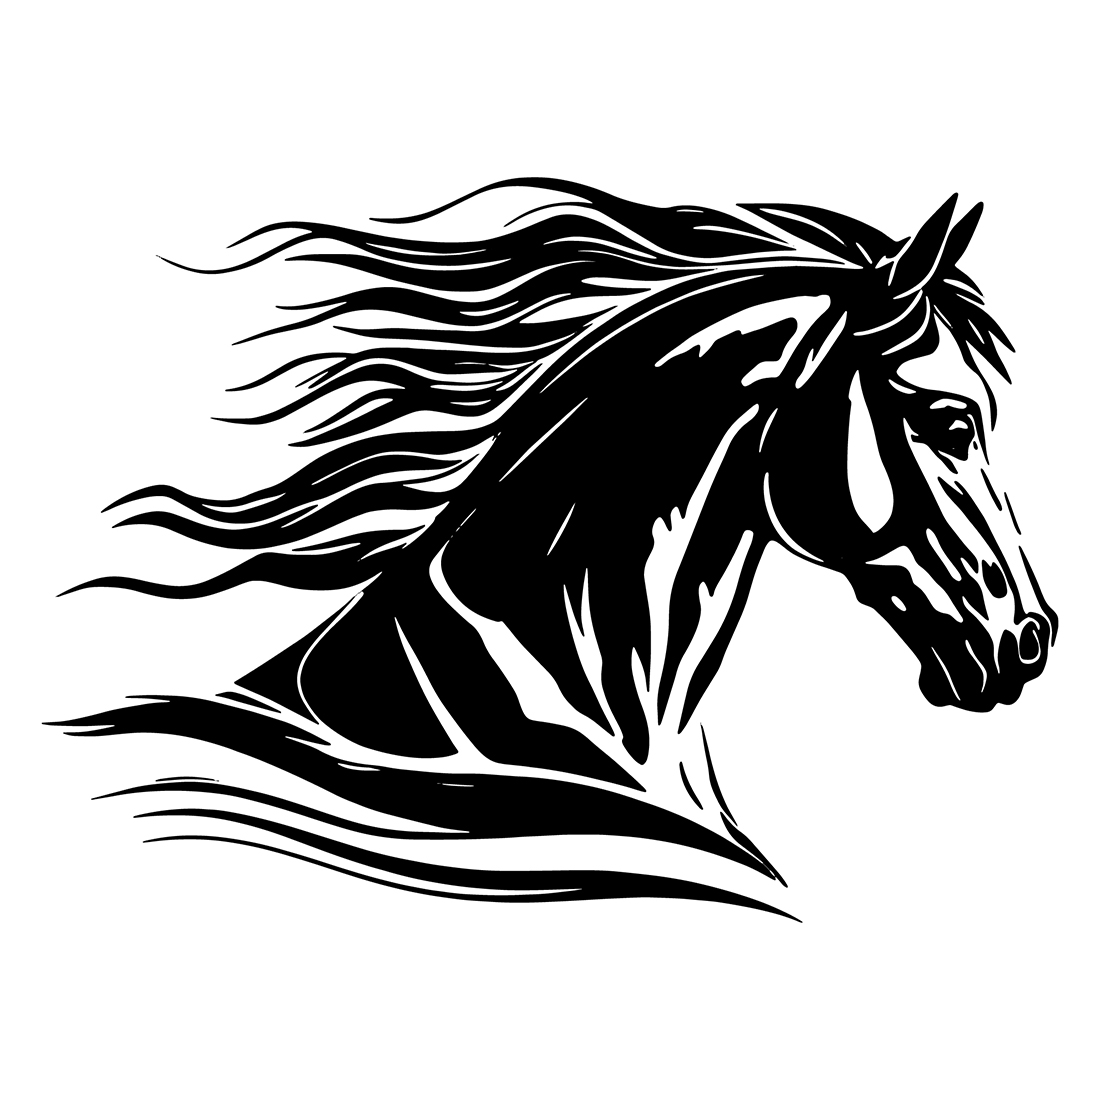 Black horse running.ai Royalty Free Stock SVG Vector and Clip Art